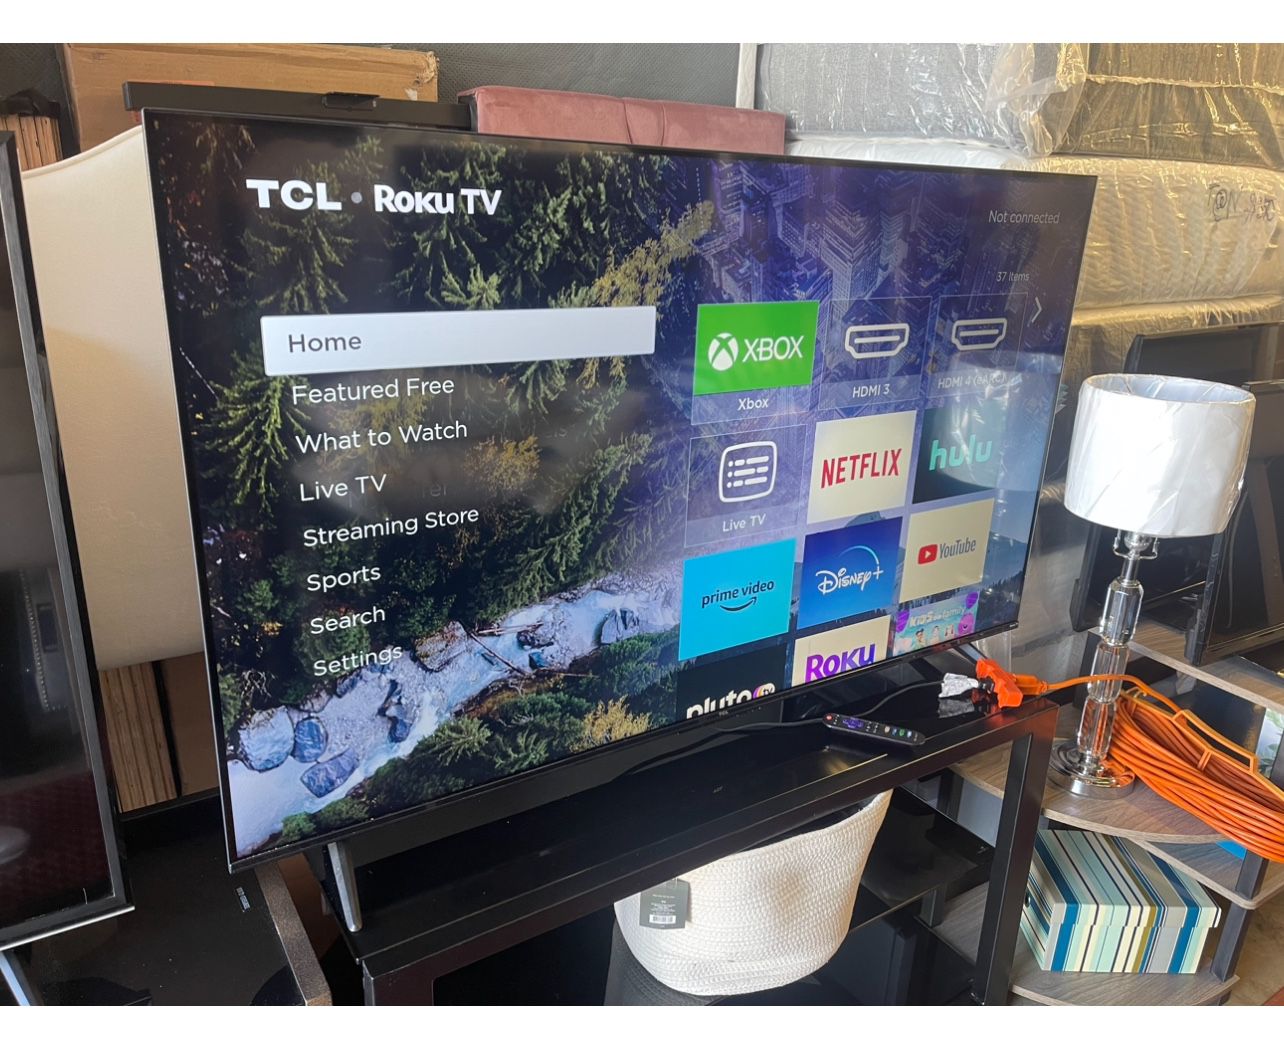 55” TCL Roku Tv $200 Or $250 With Stand 